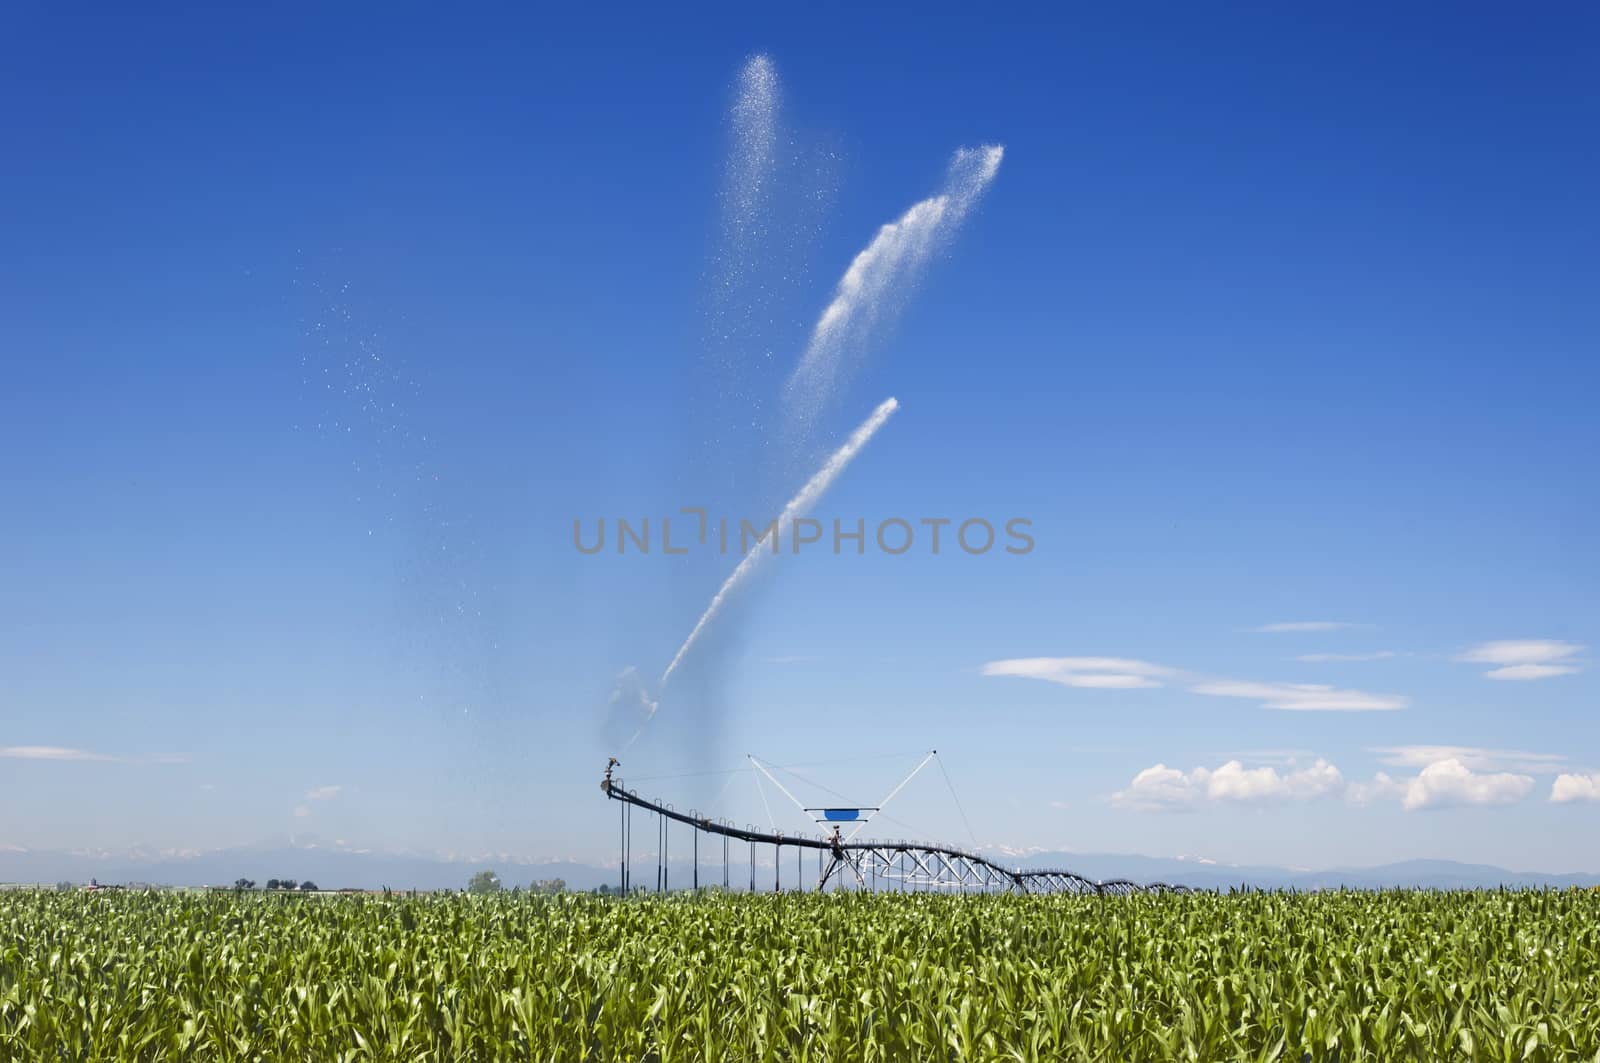 Cornfield in Colorado, irrigated with a center pivot sytem east of the Rocky Mountains.